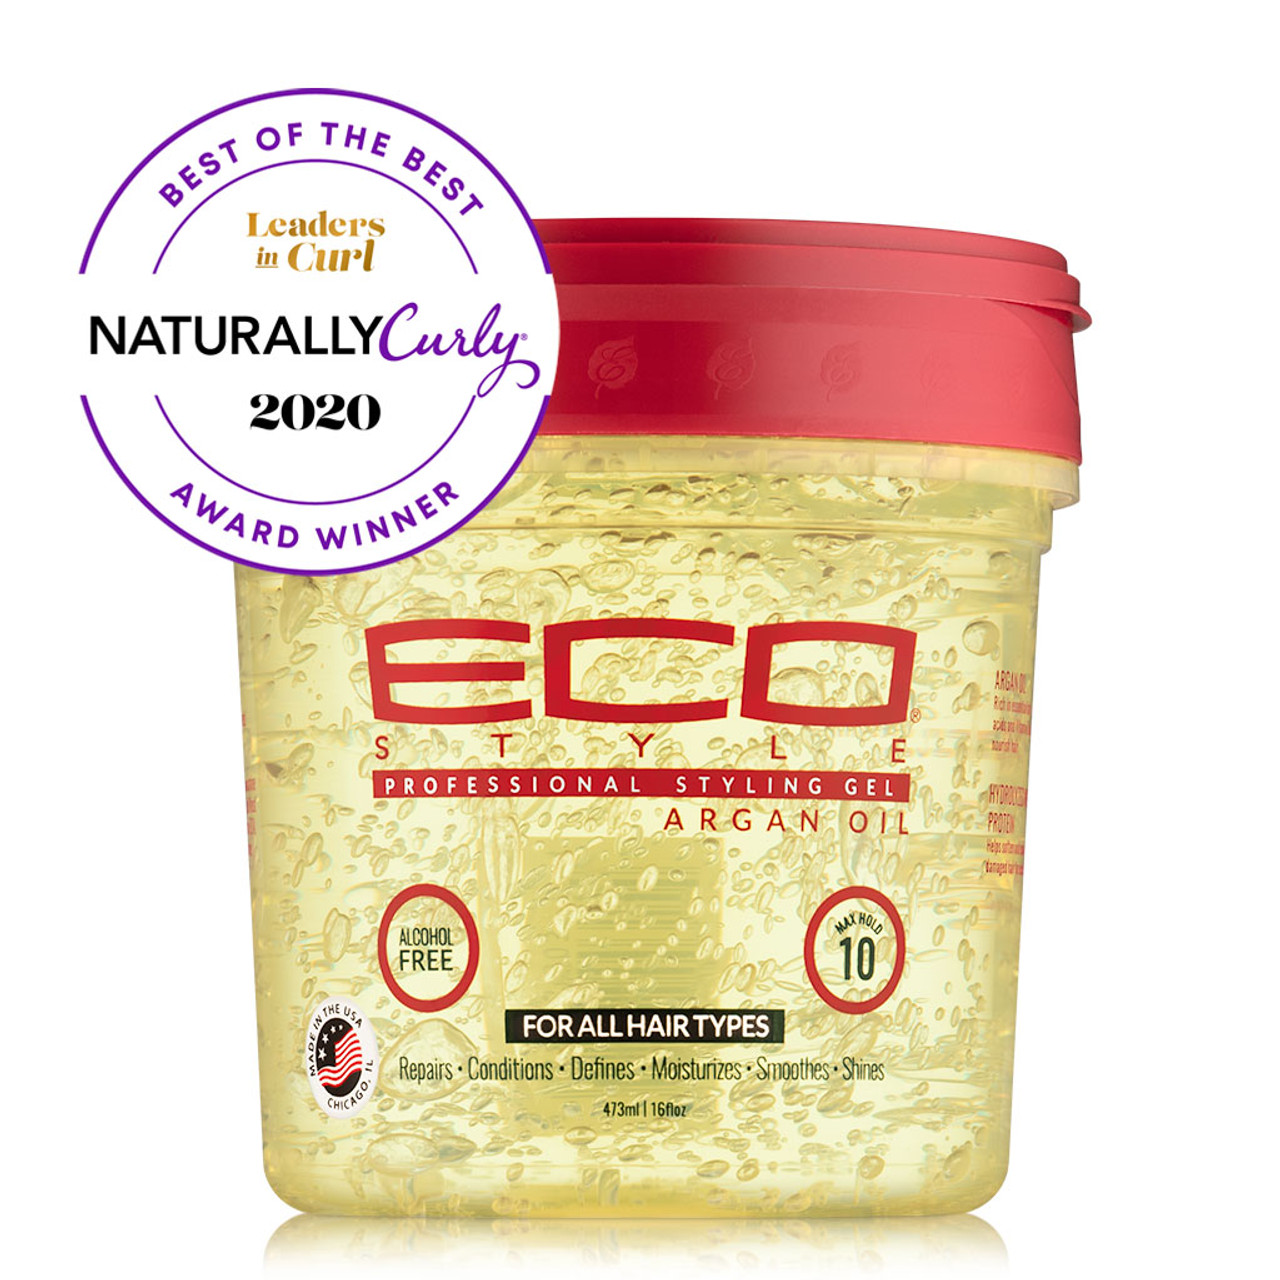 Ecoco Eco Styler Professional Styling Gel with Argan Oil (16 oz.) -  NaturallyCurly